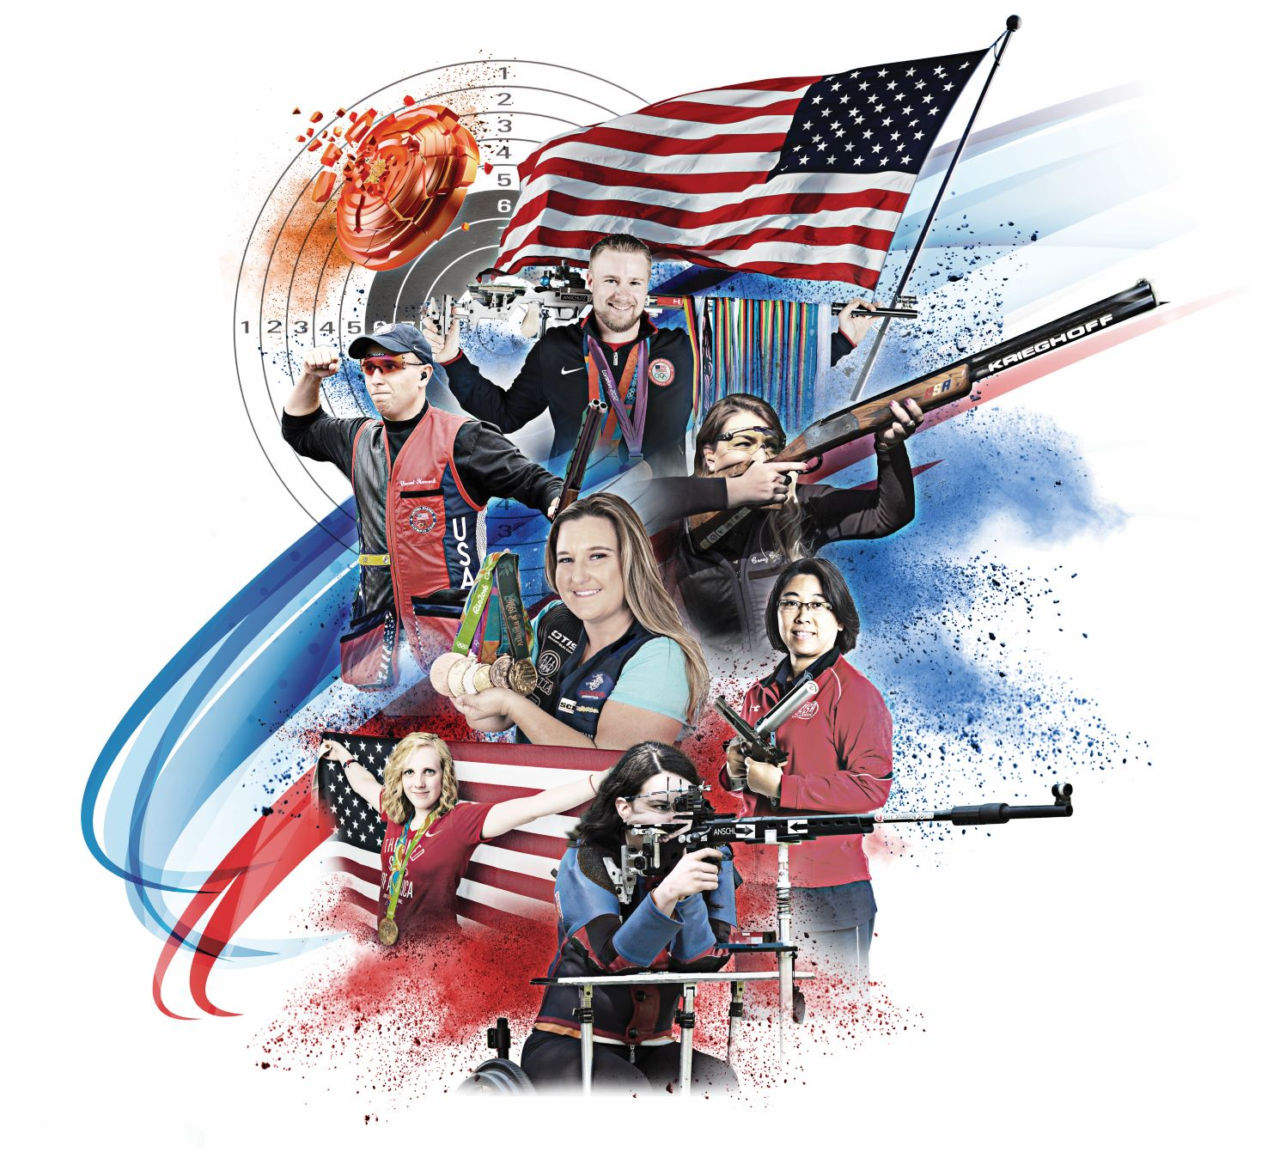 USA Shooting’s 2020 Vision: Industry & Community-Wide Support